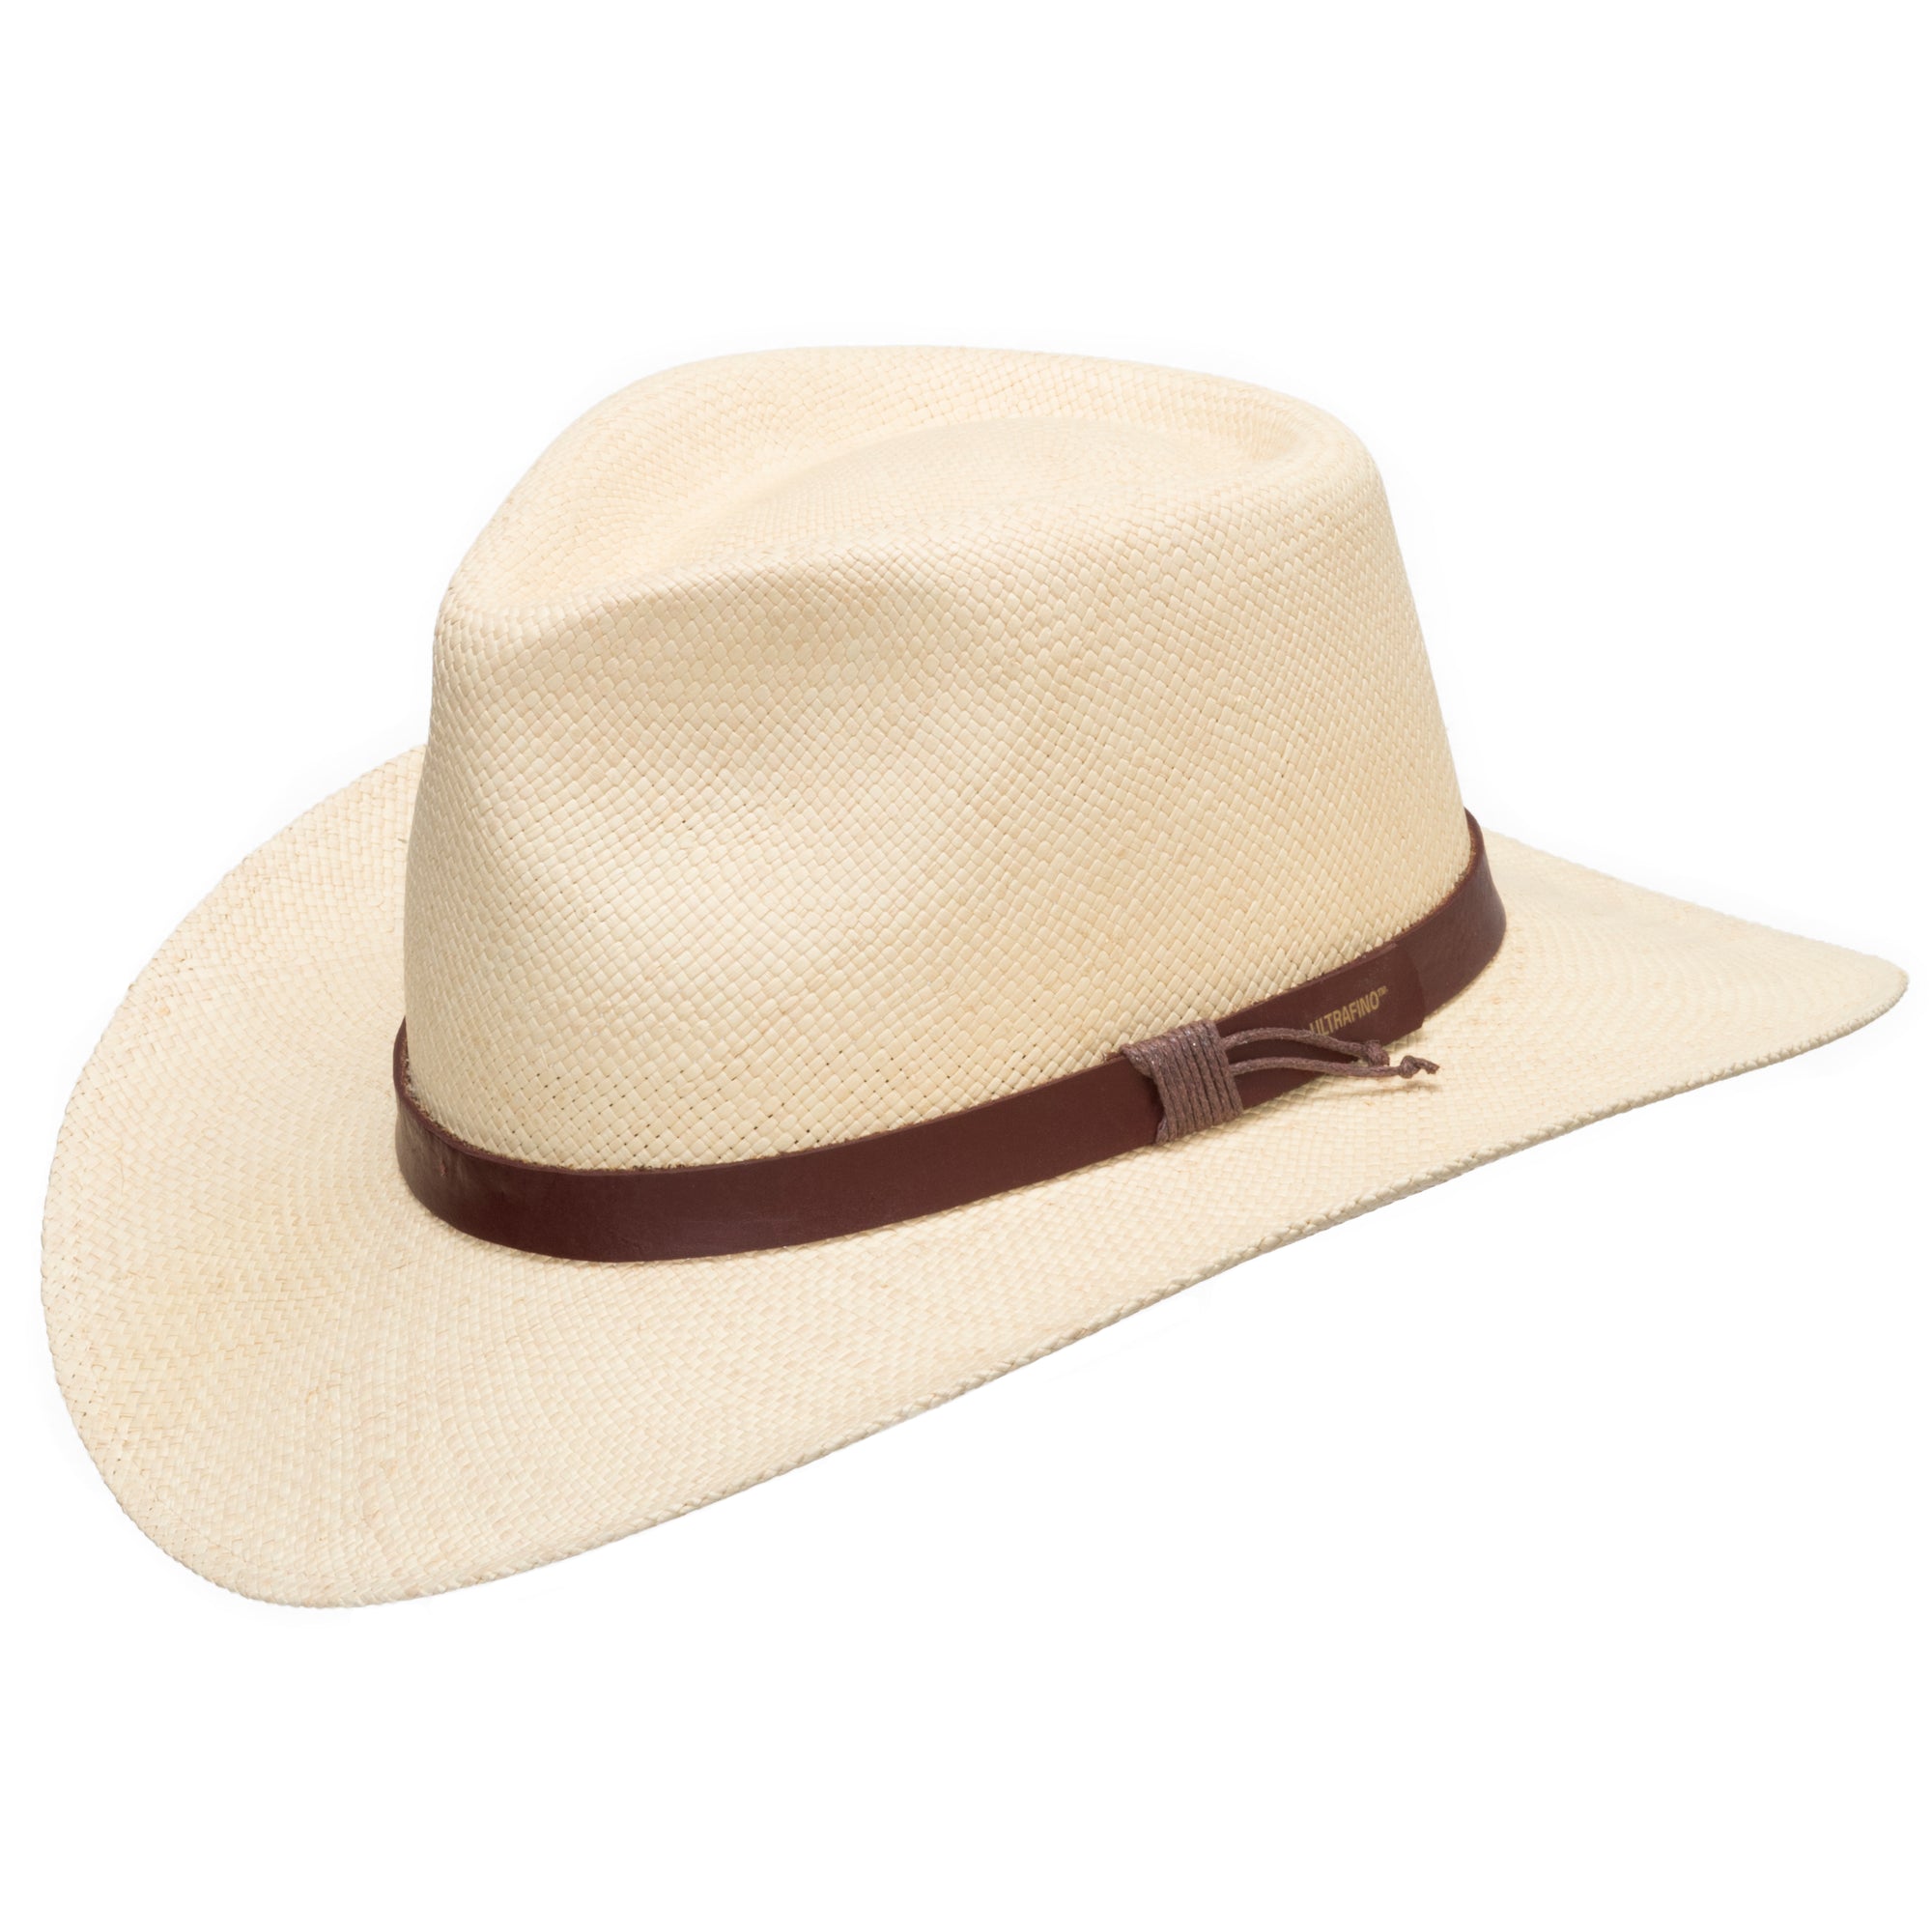 Panama Hat Mens  Shop The Finest Straw Hats From Ultrafino